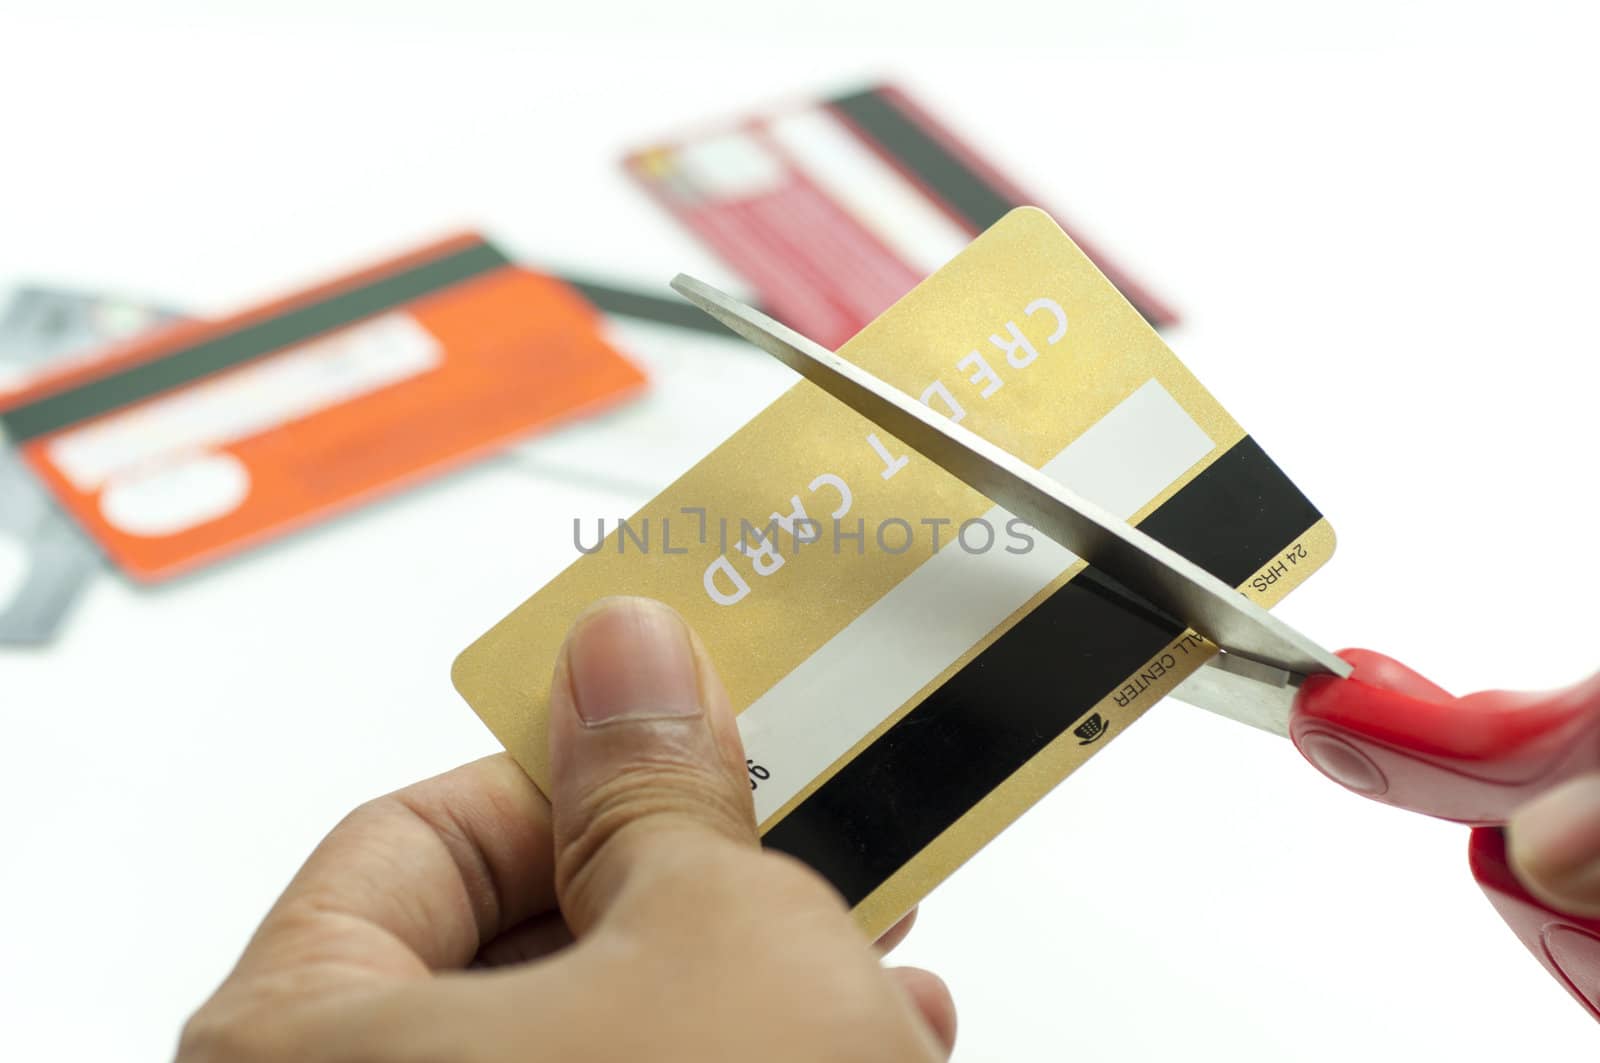 cutting up credit card with scissors by TanawatPontchour